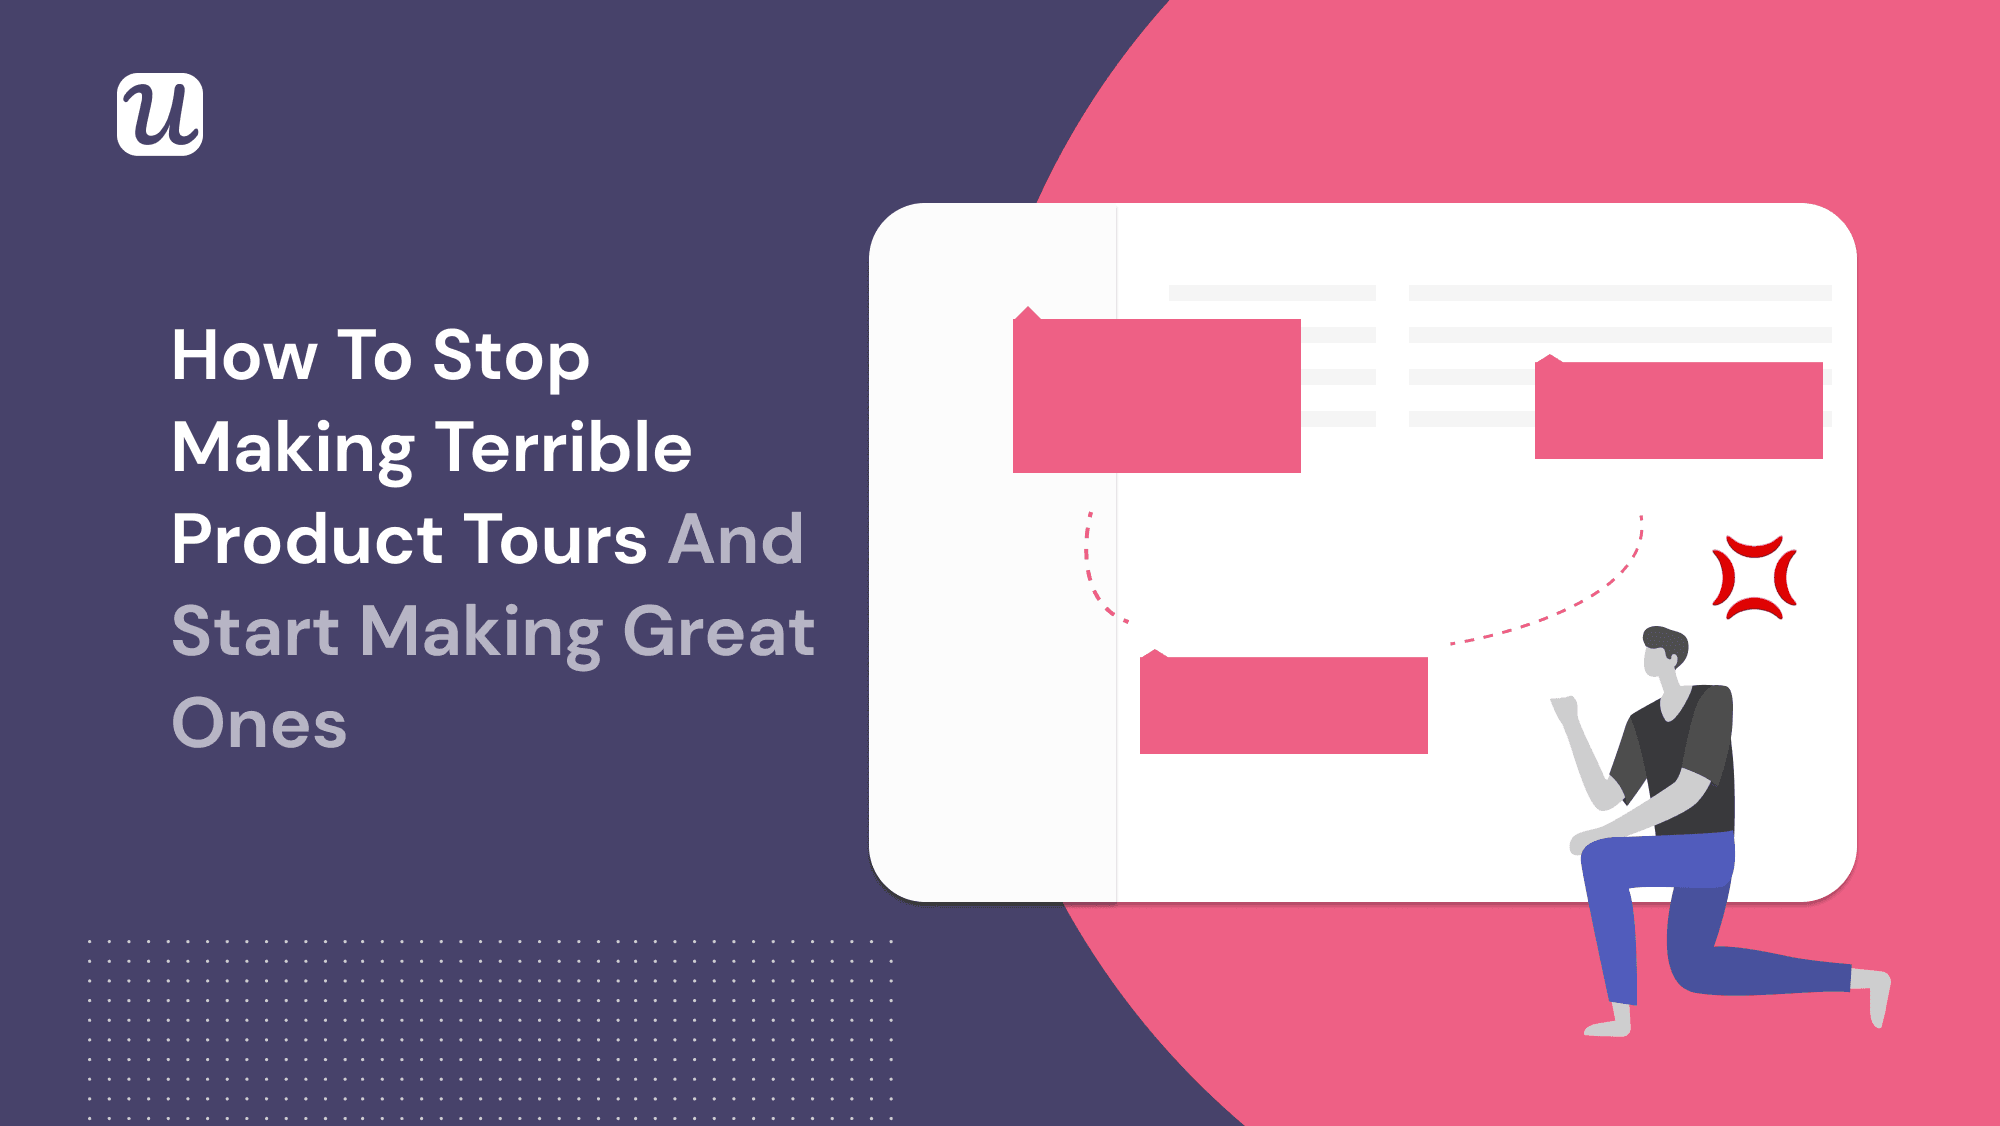 How to Stop Making Terrible Product Tours and Start Making Great Ones